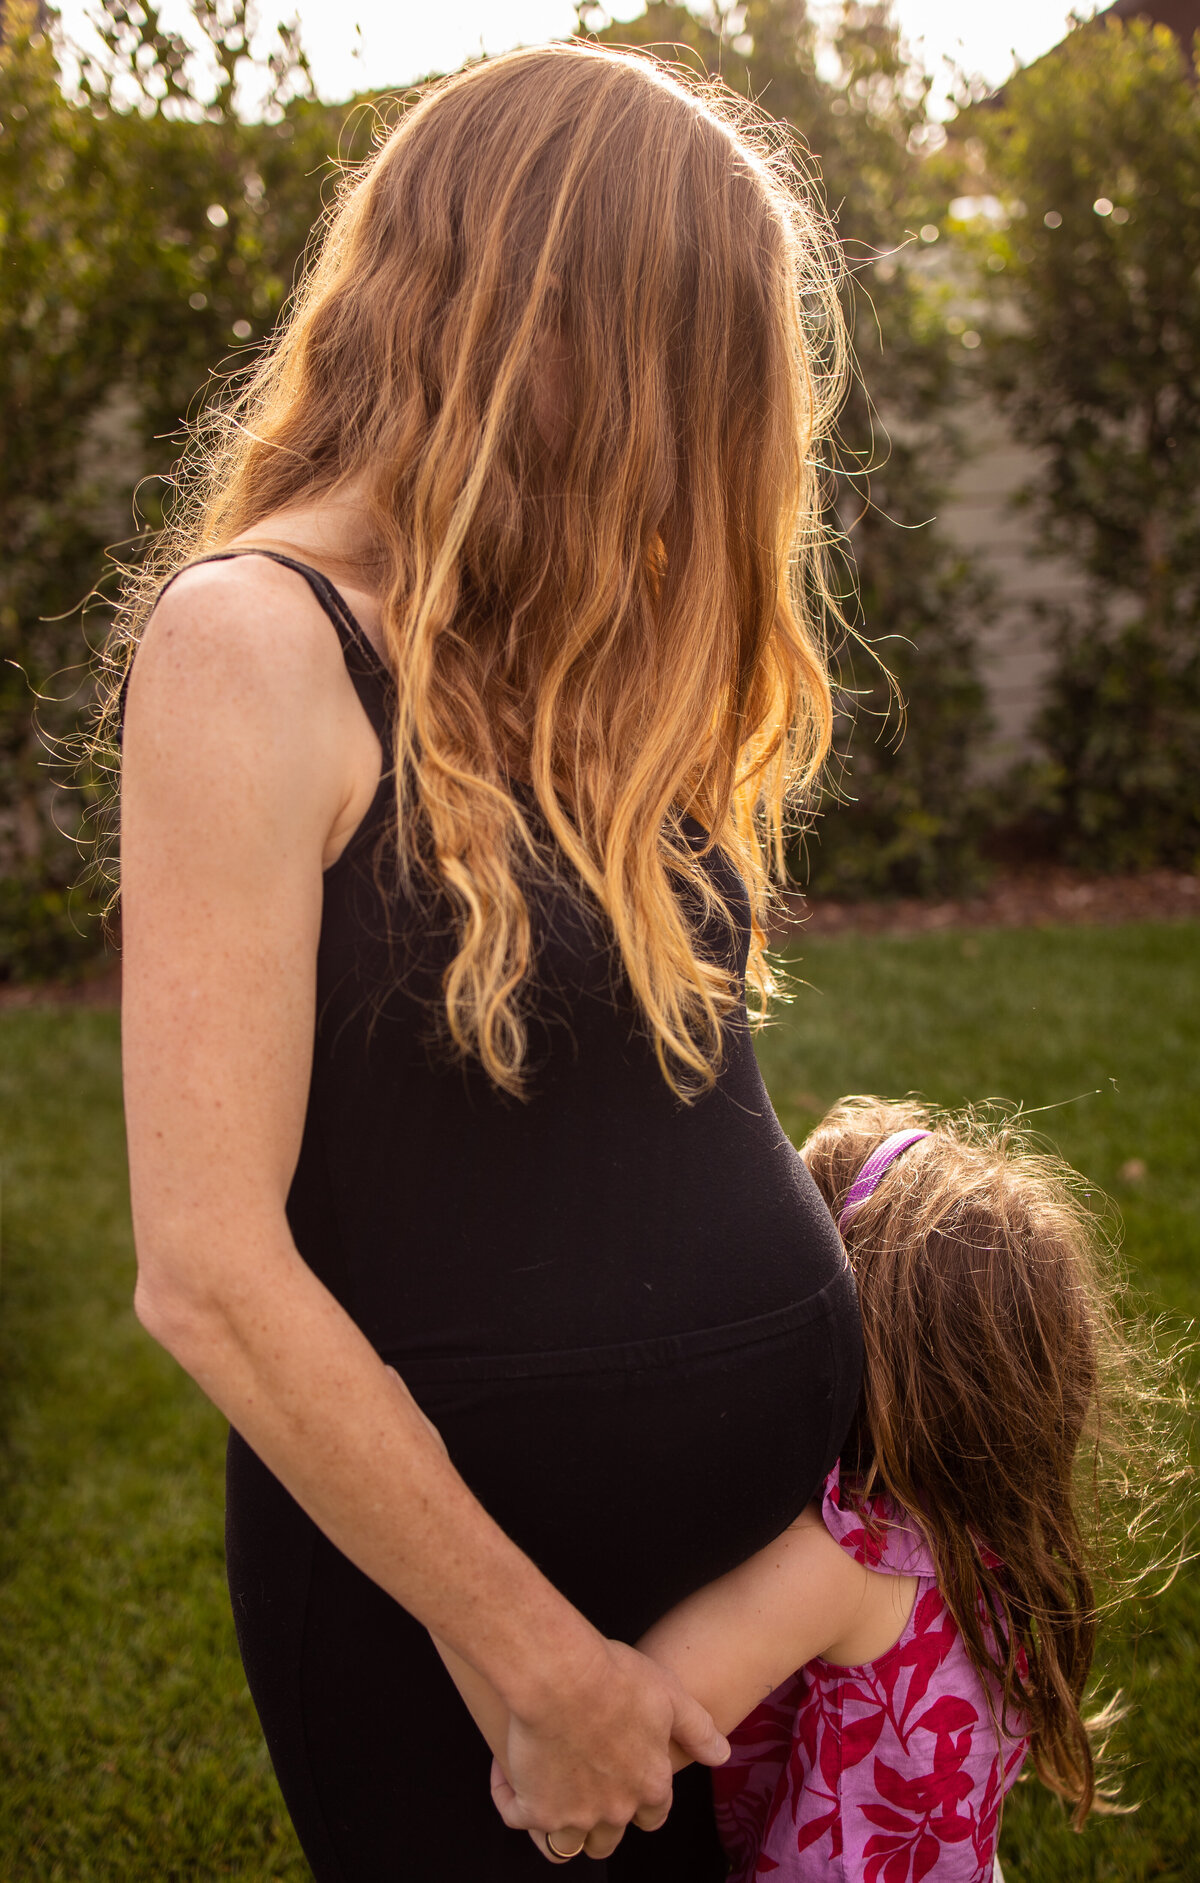 Daughter embraces mother's pregnant stomach